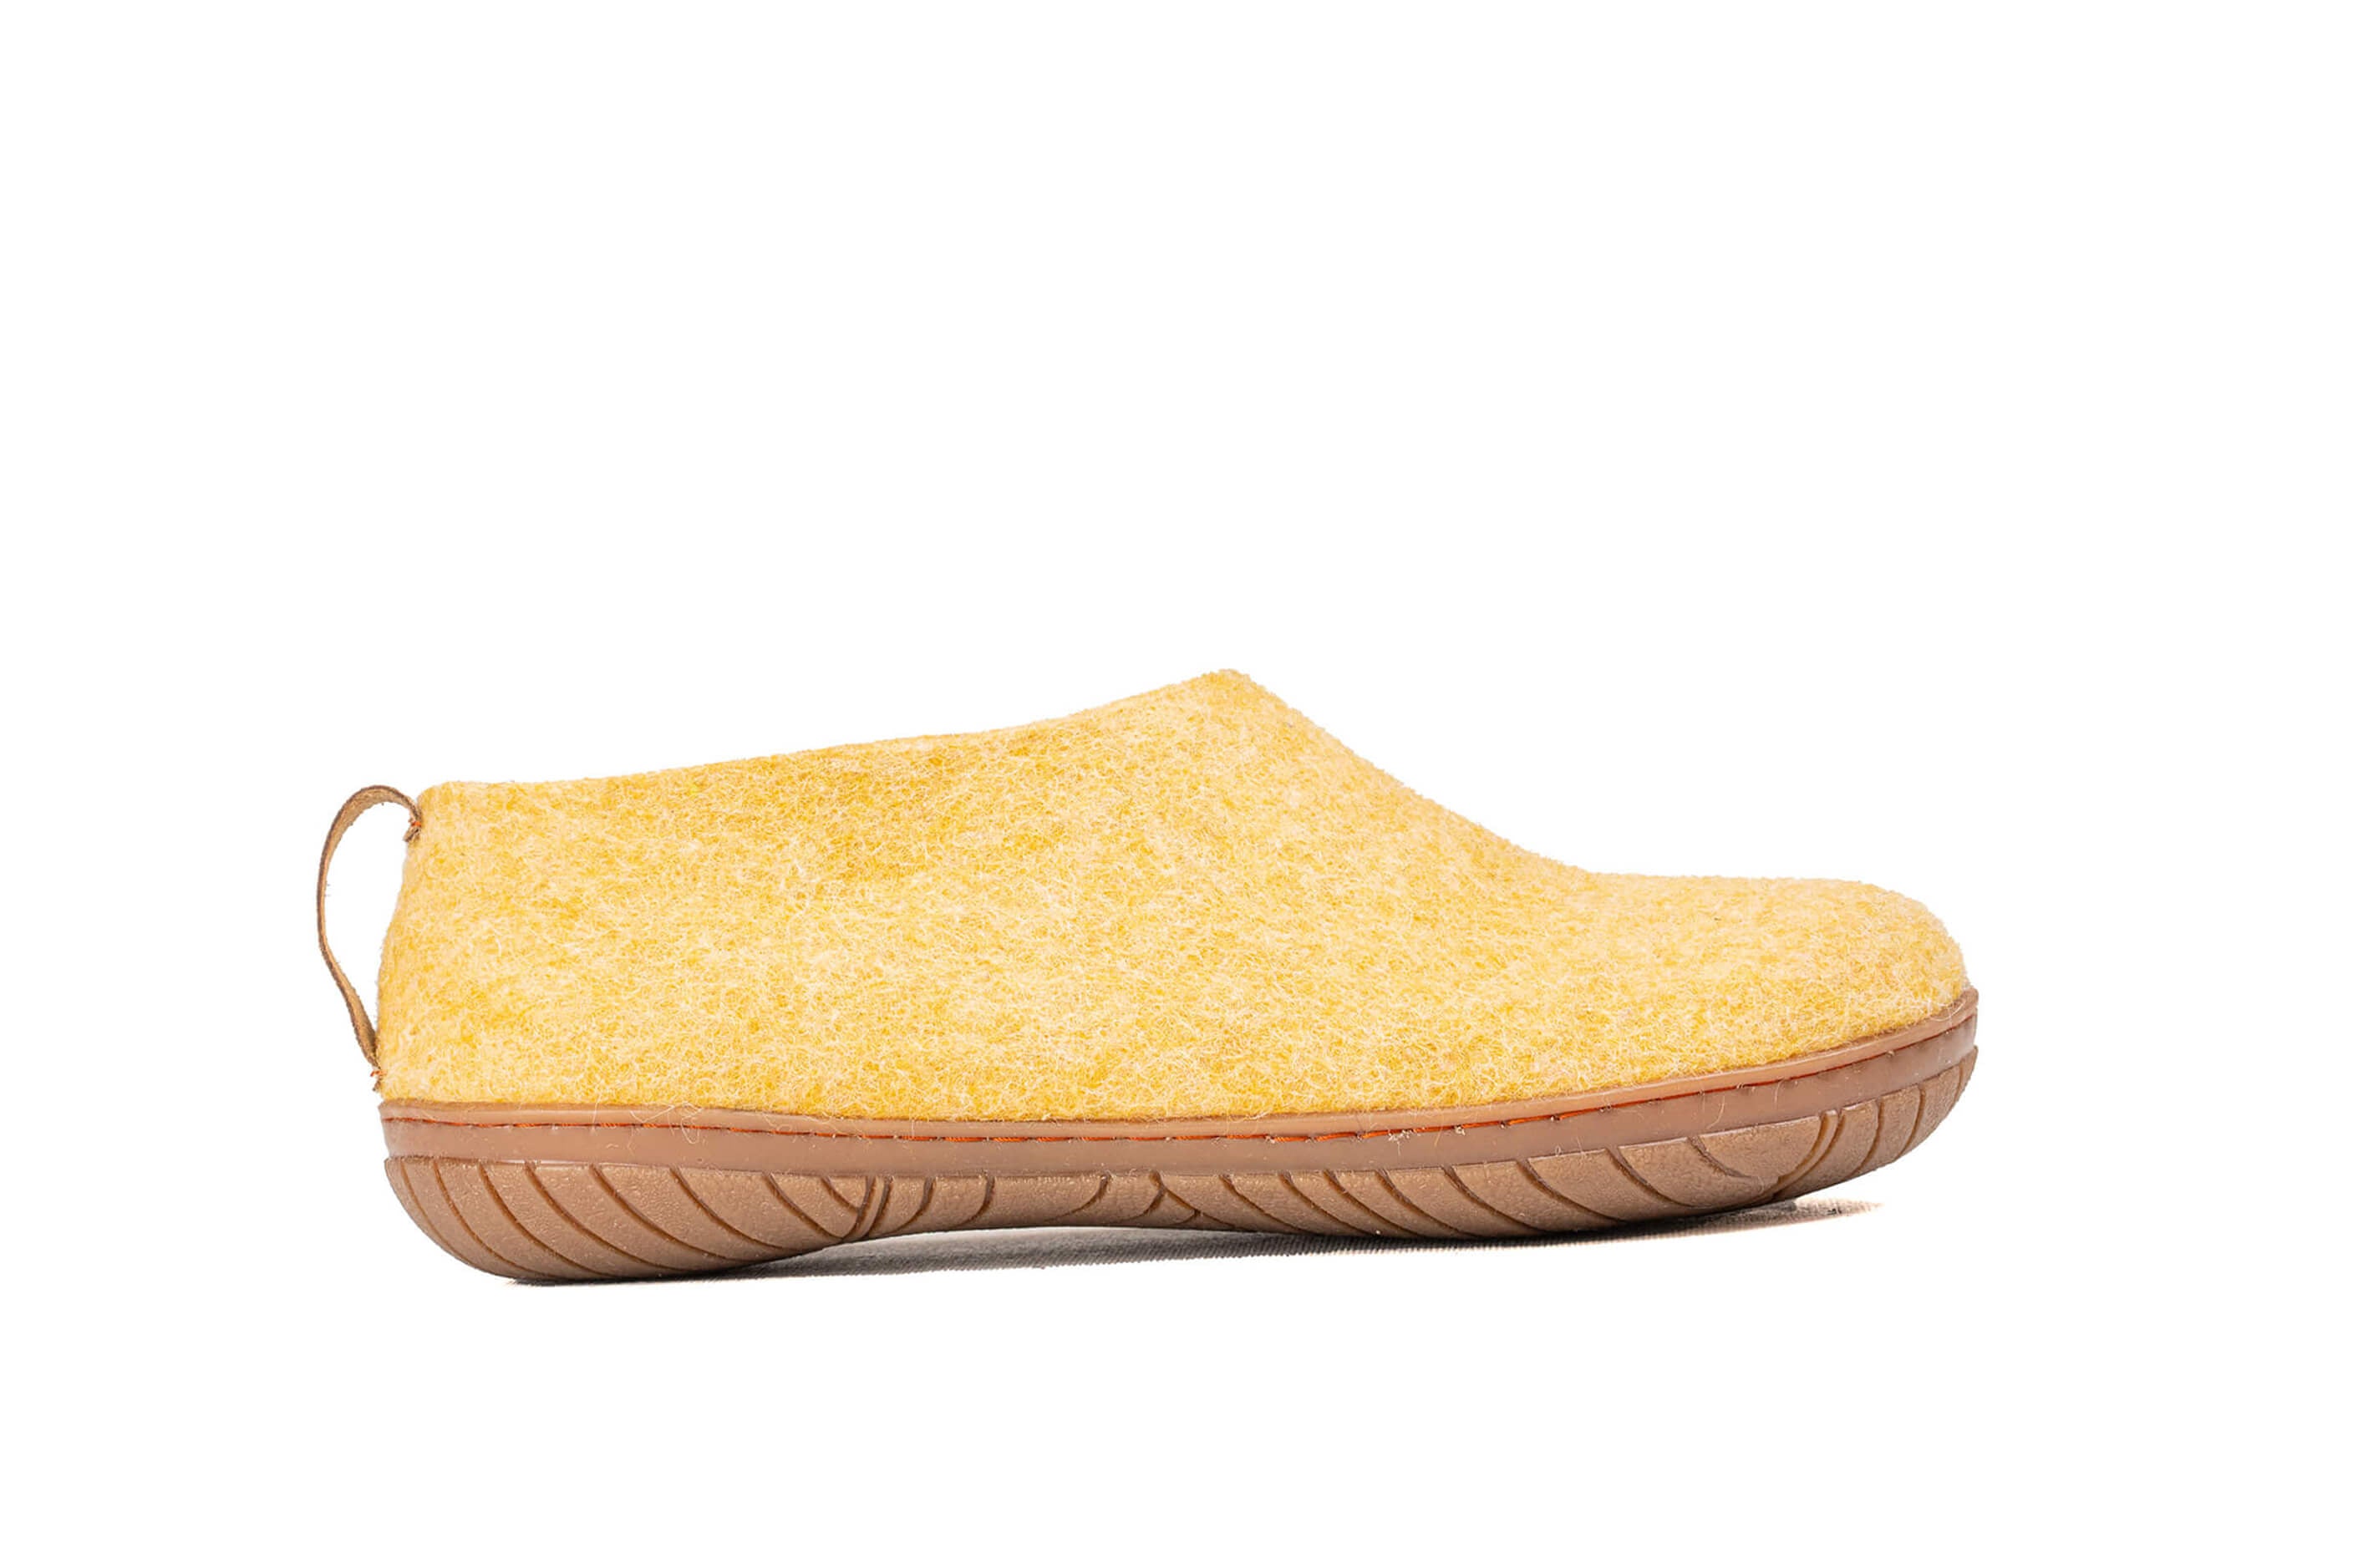 Outdoor Shoes With Rubber Sole - Mustard